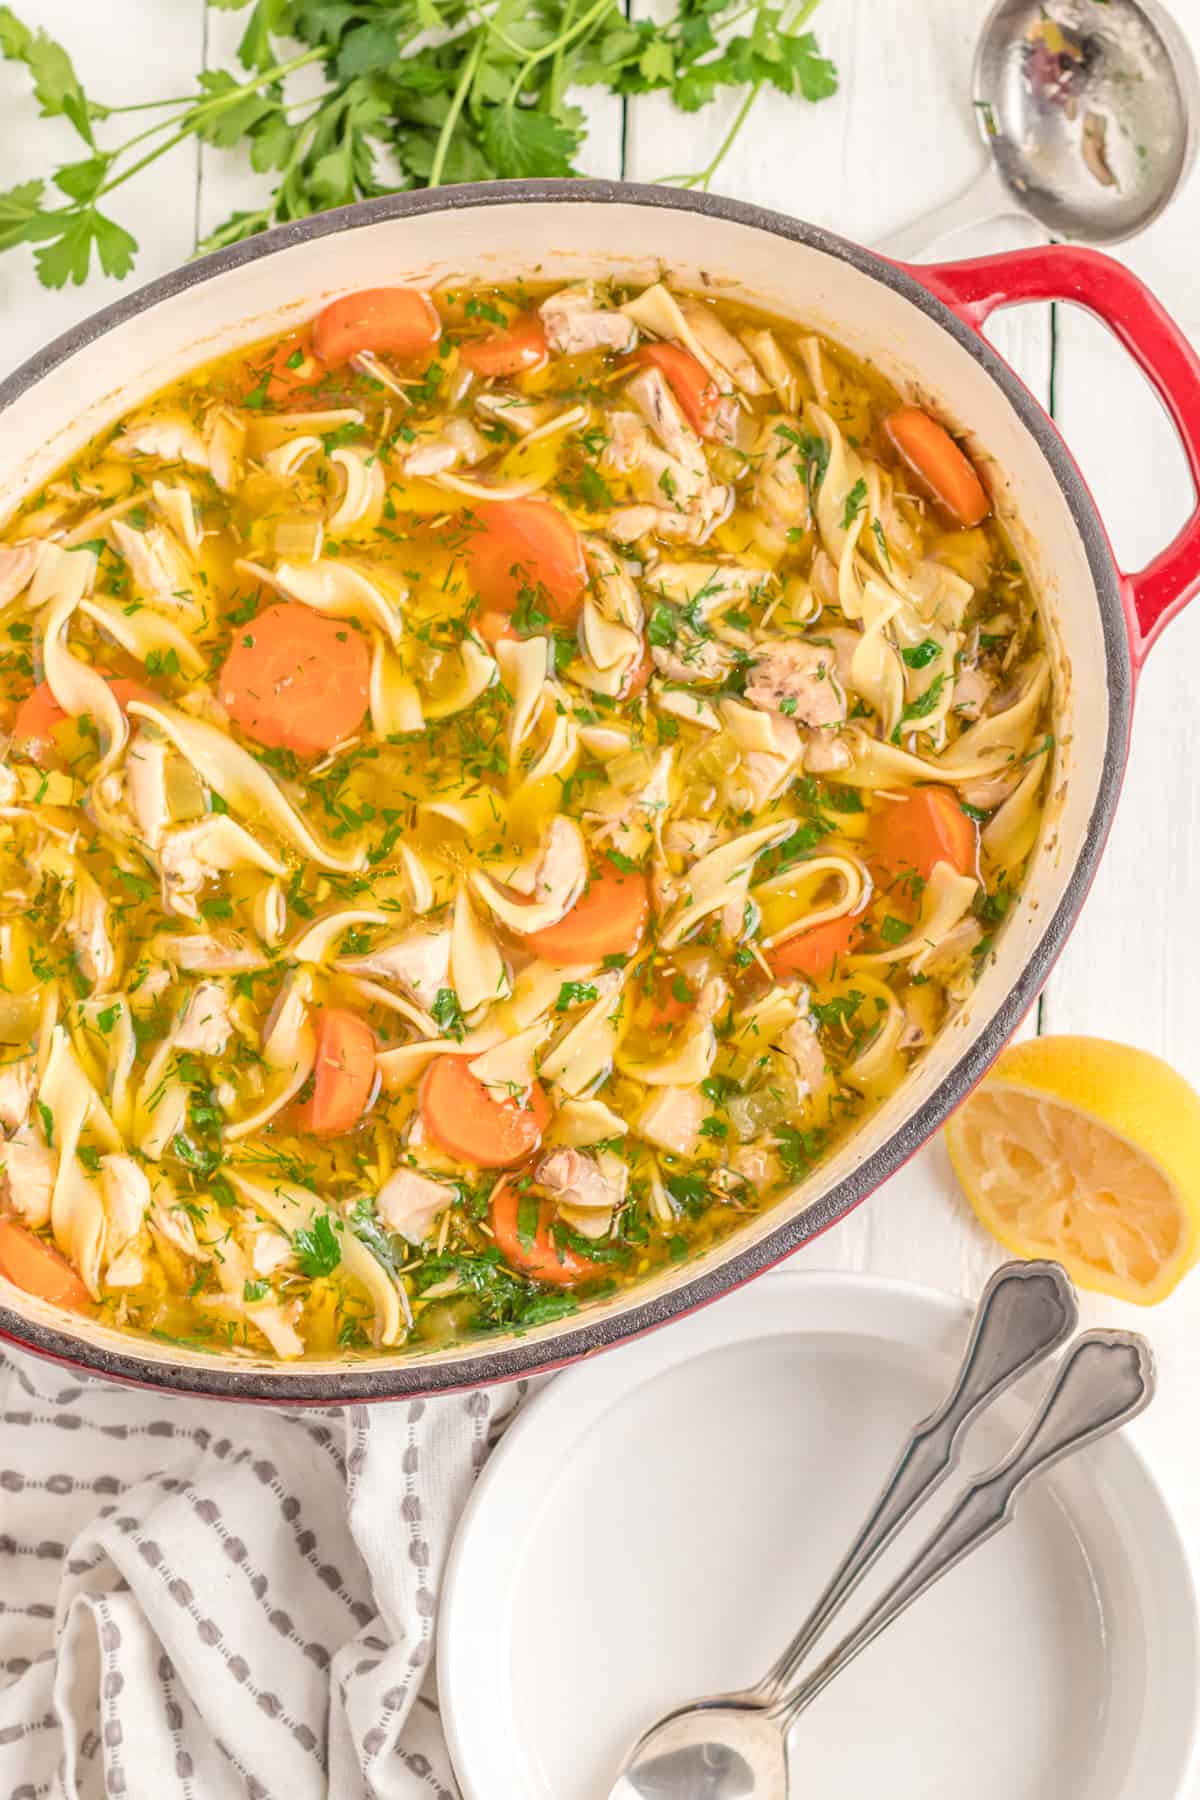 chicken noodle soup recipe best from scratch homestyle old fashioned healthy aneto broth